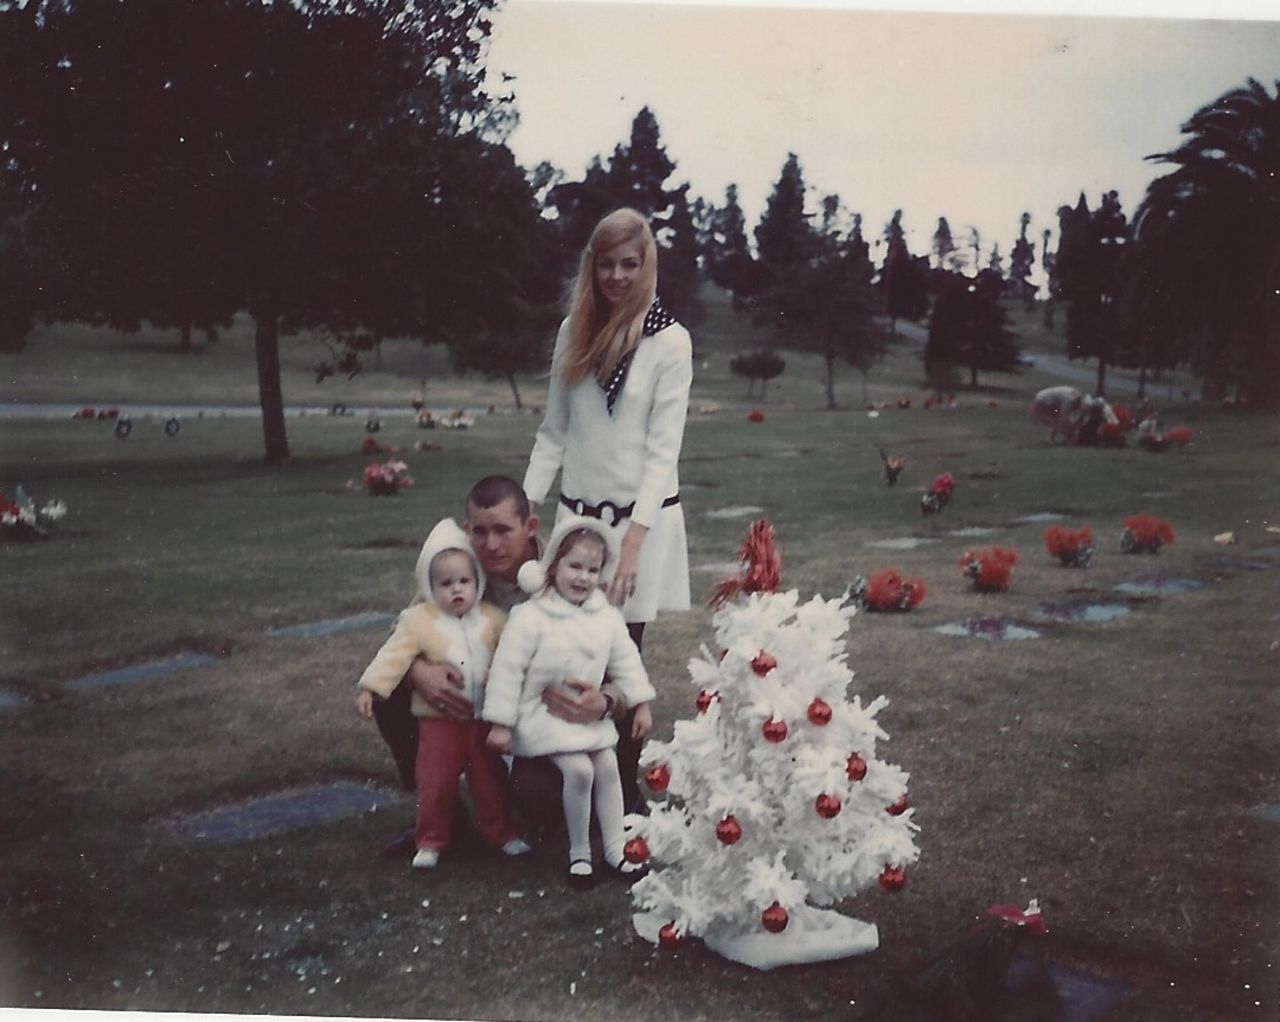 <a href="http://ireport.cnn.com/docs/DOC-952187">Lisa Papworth-Buckland</a>, bottom left, went to visit her grandfather's grave in Los Angeles in 1969 and recalls her mother's fashion sensibilities. Later, after her parents' divorce, she "moved into a dome house in Box Canyon and we lived the pure hippie life."